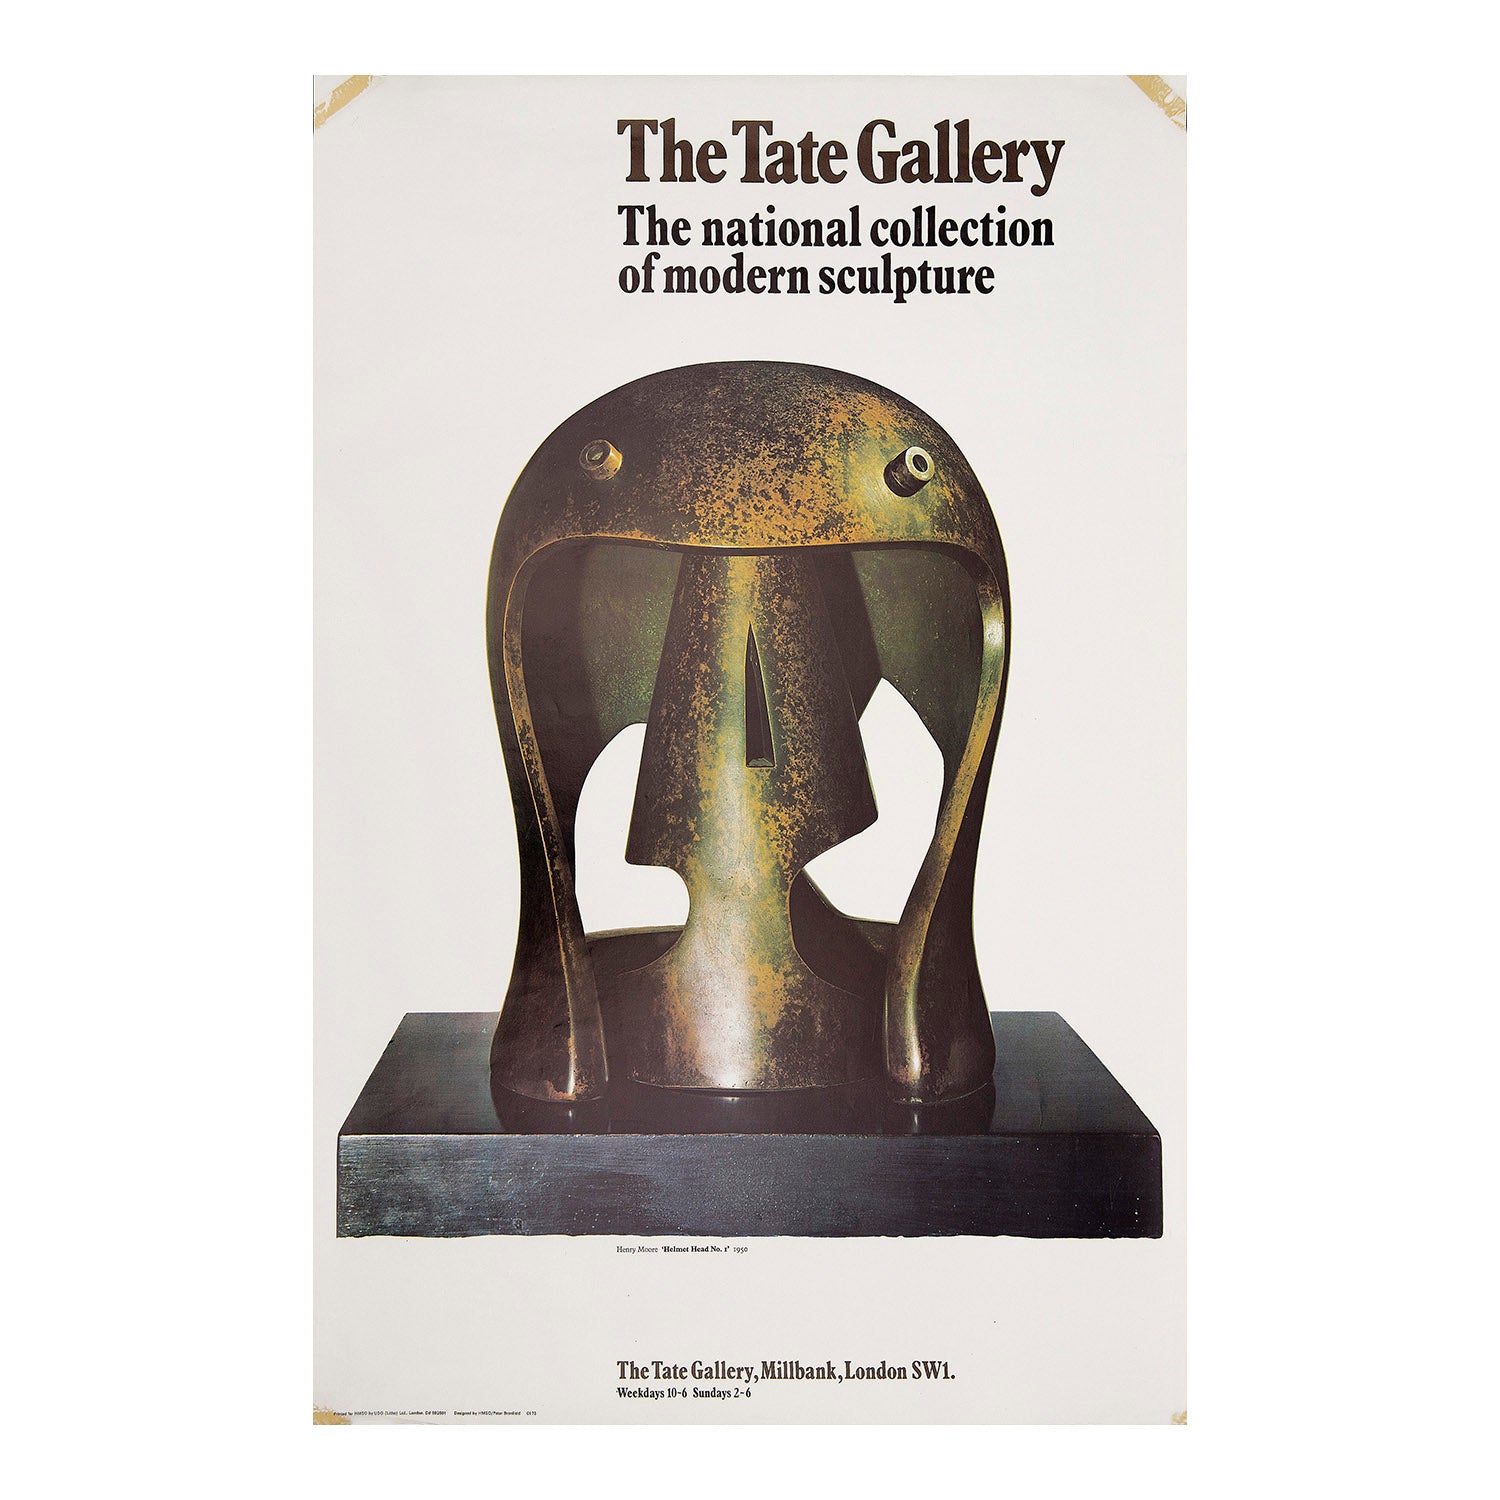 The Tate Gallery. The national collection of modern sculpture